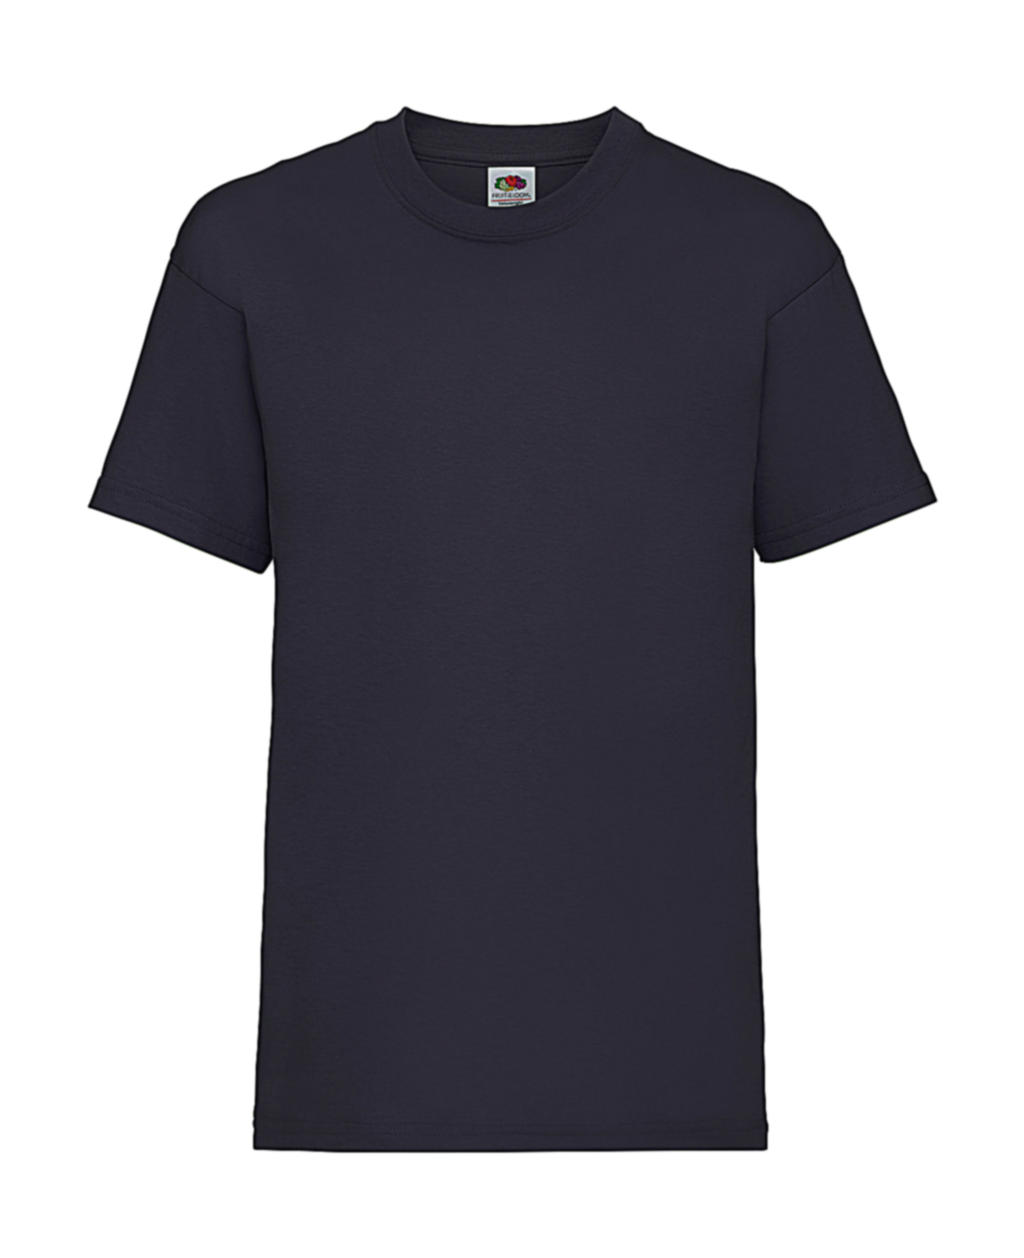  Kids Valueweight T in Farbe Deep Navy